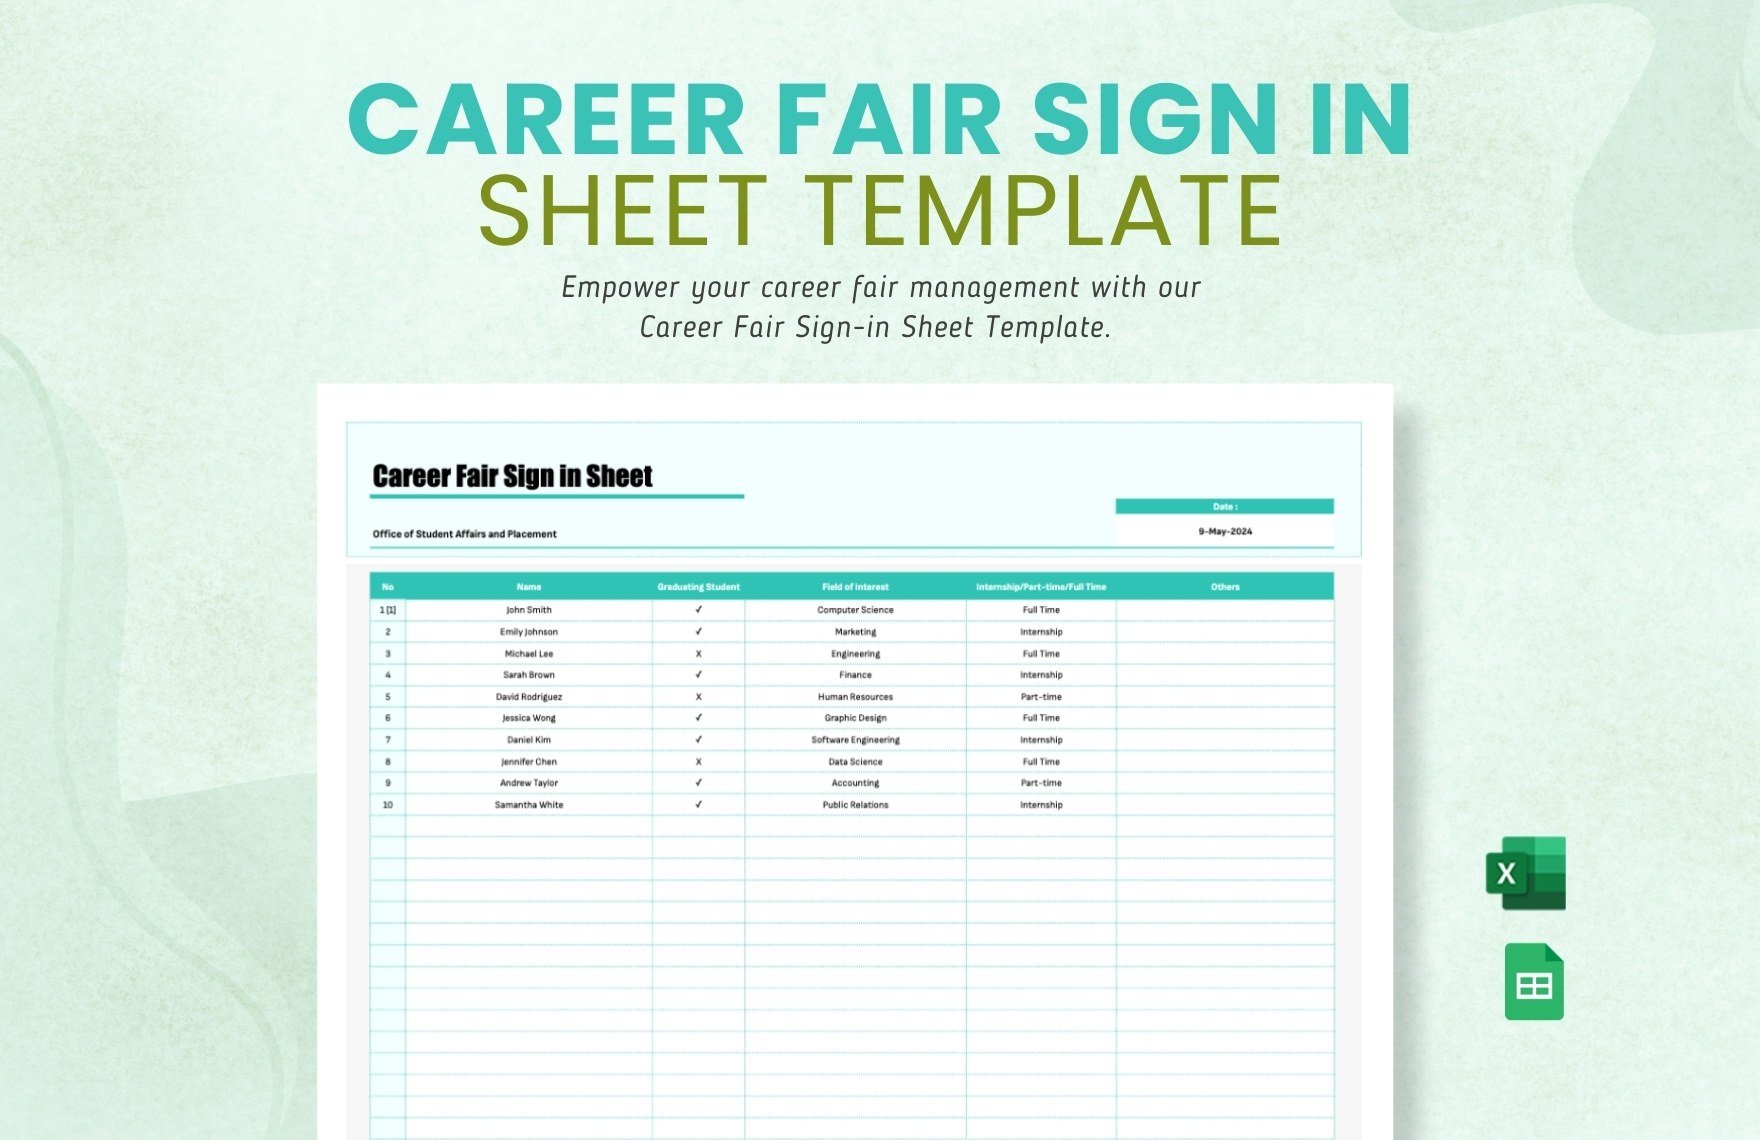 Career Fair Sign in Sheet Template in Excel, Google Sheets